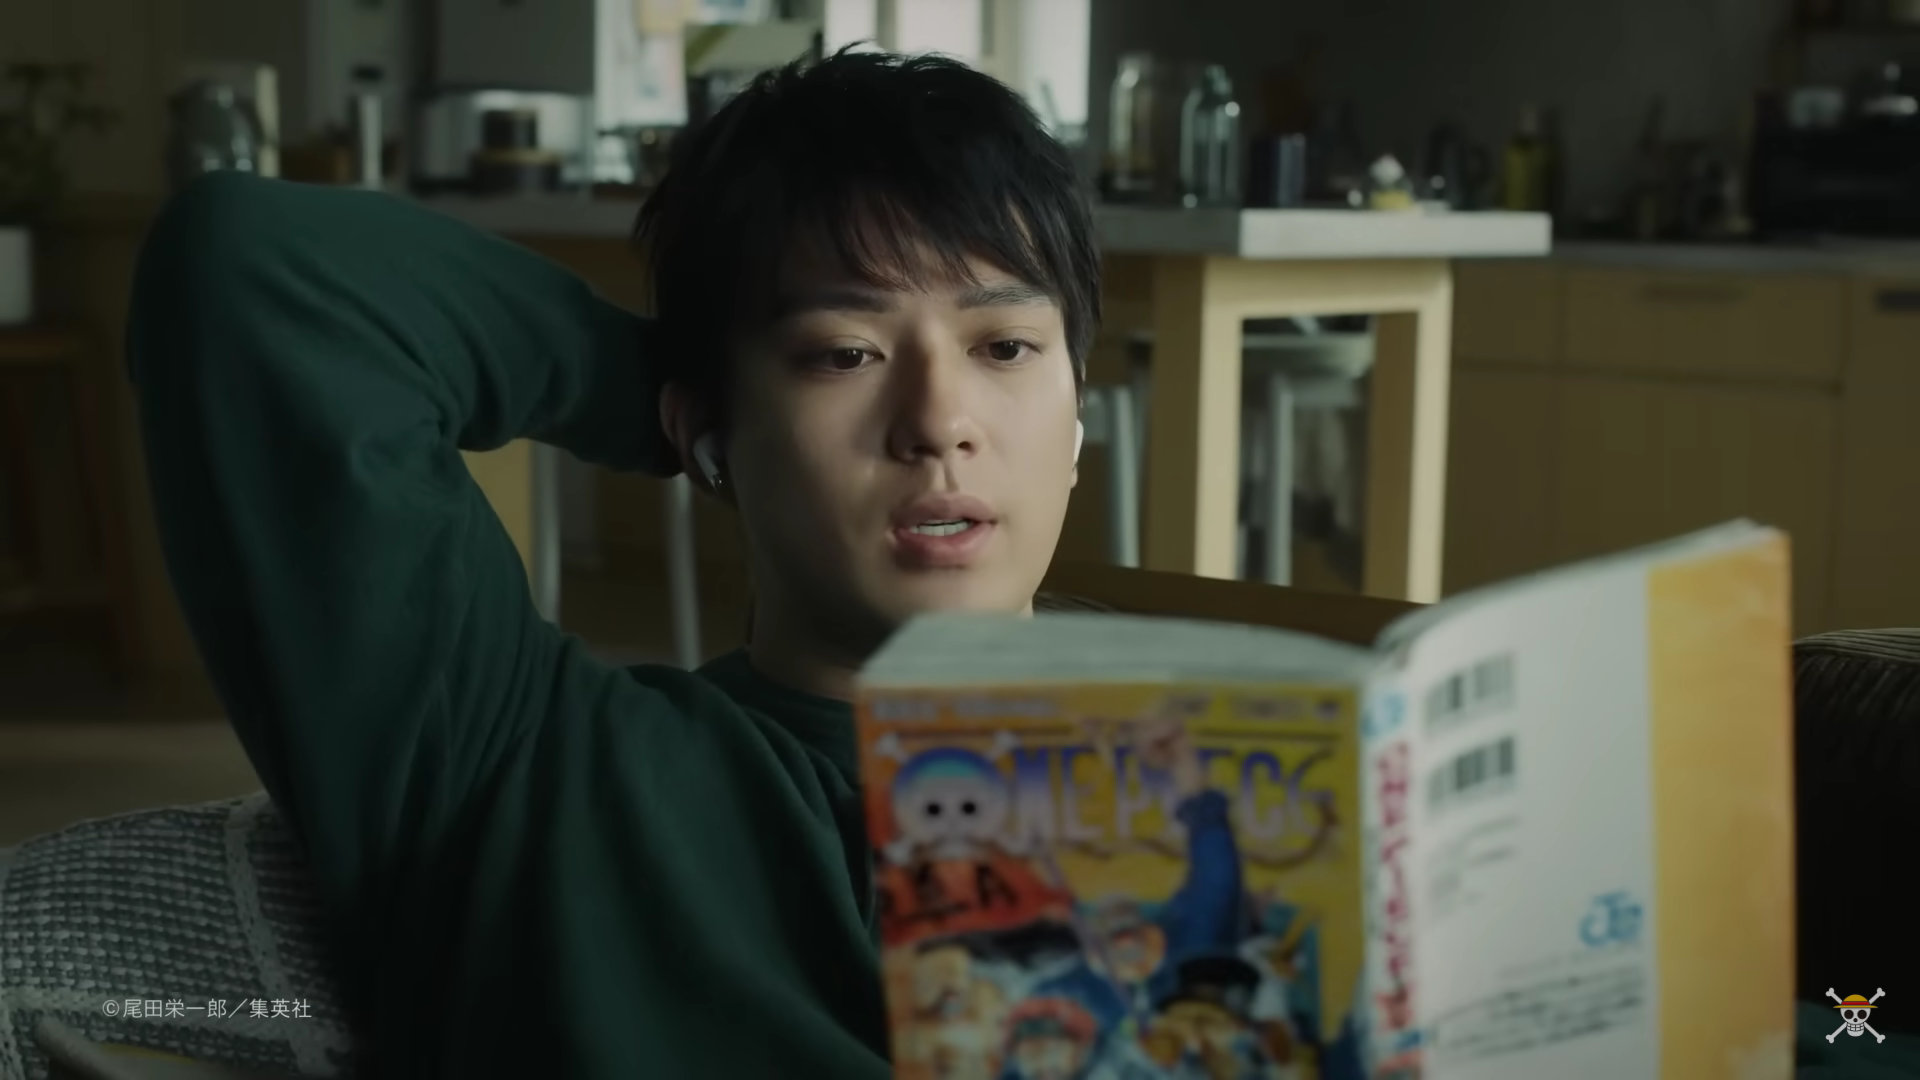 one-piece-volume-107-commercial-features-mackenyu-–-live-action-zoro